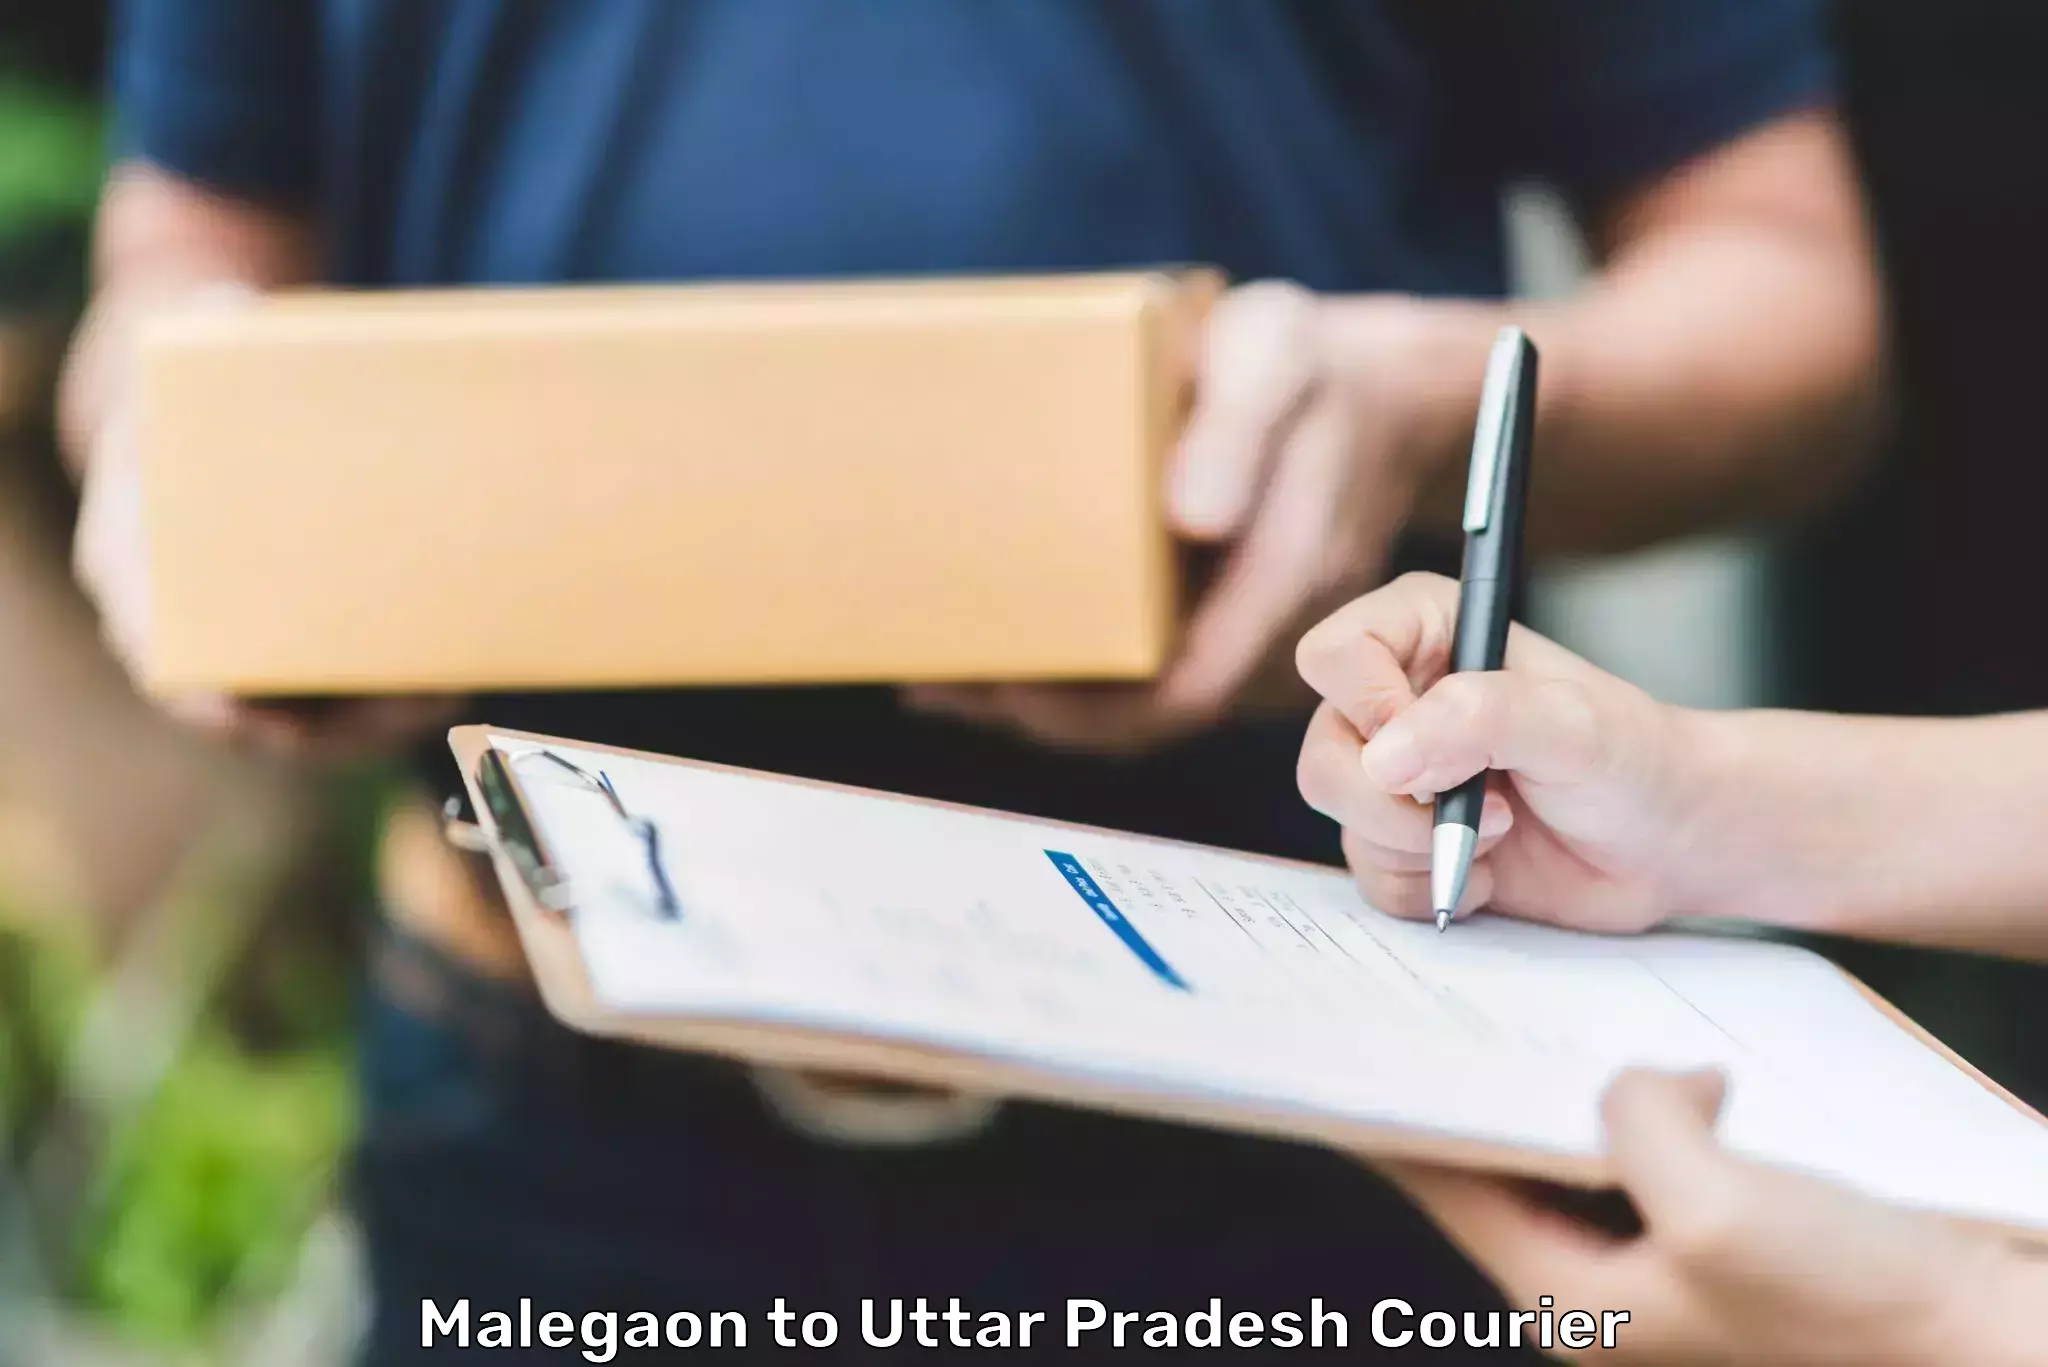 Efficient order fulfillment in Malegaon to Aligarh